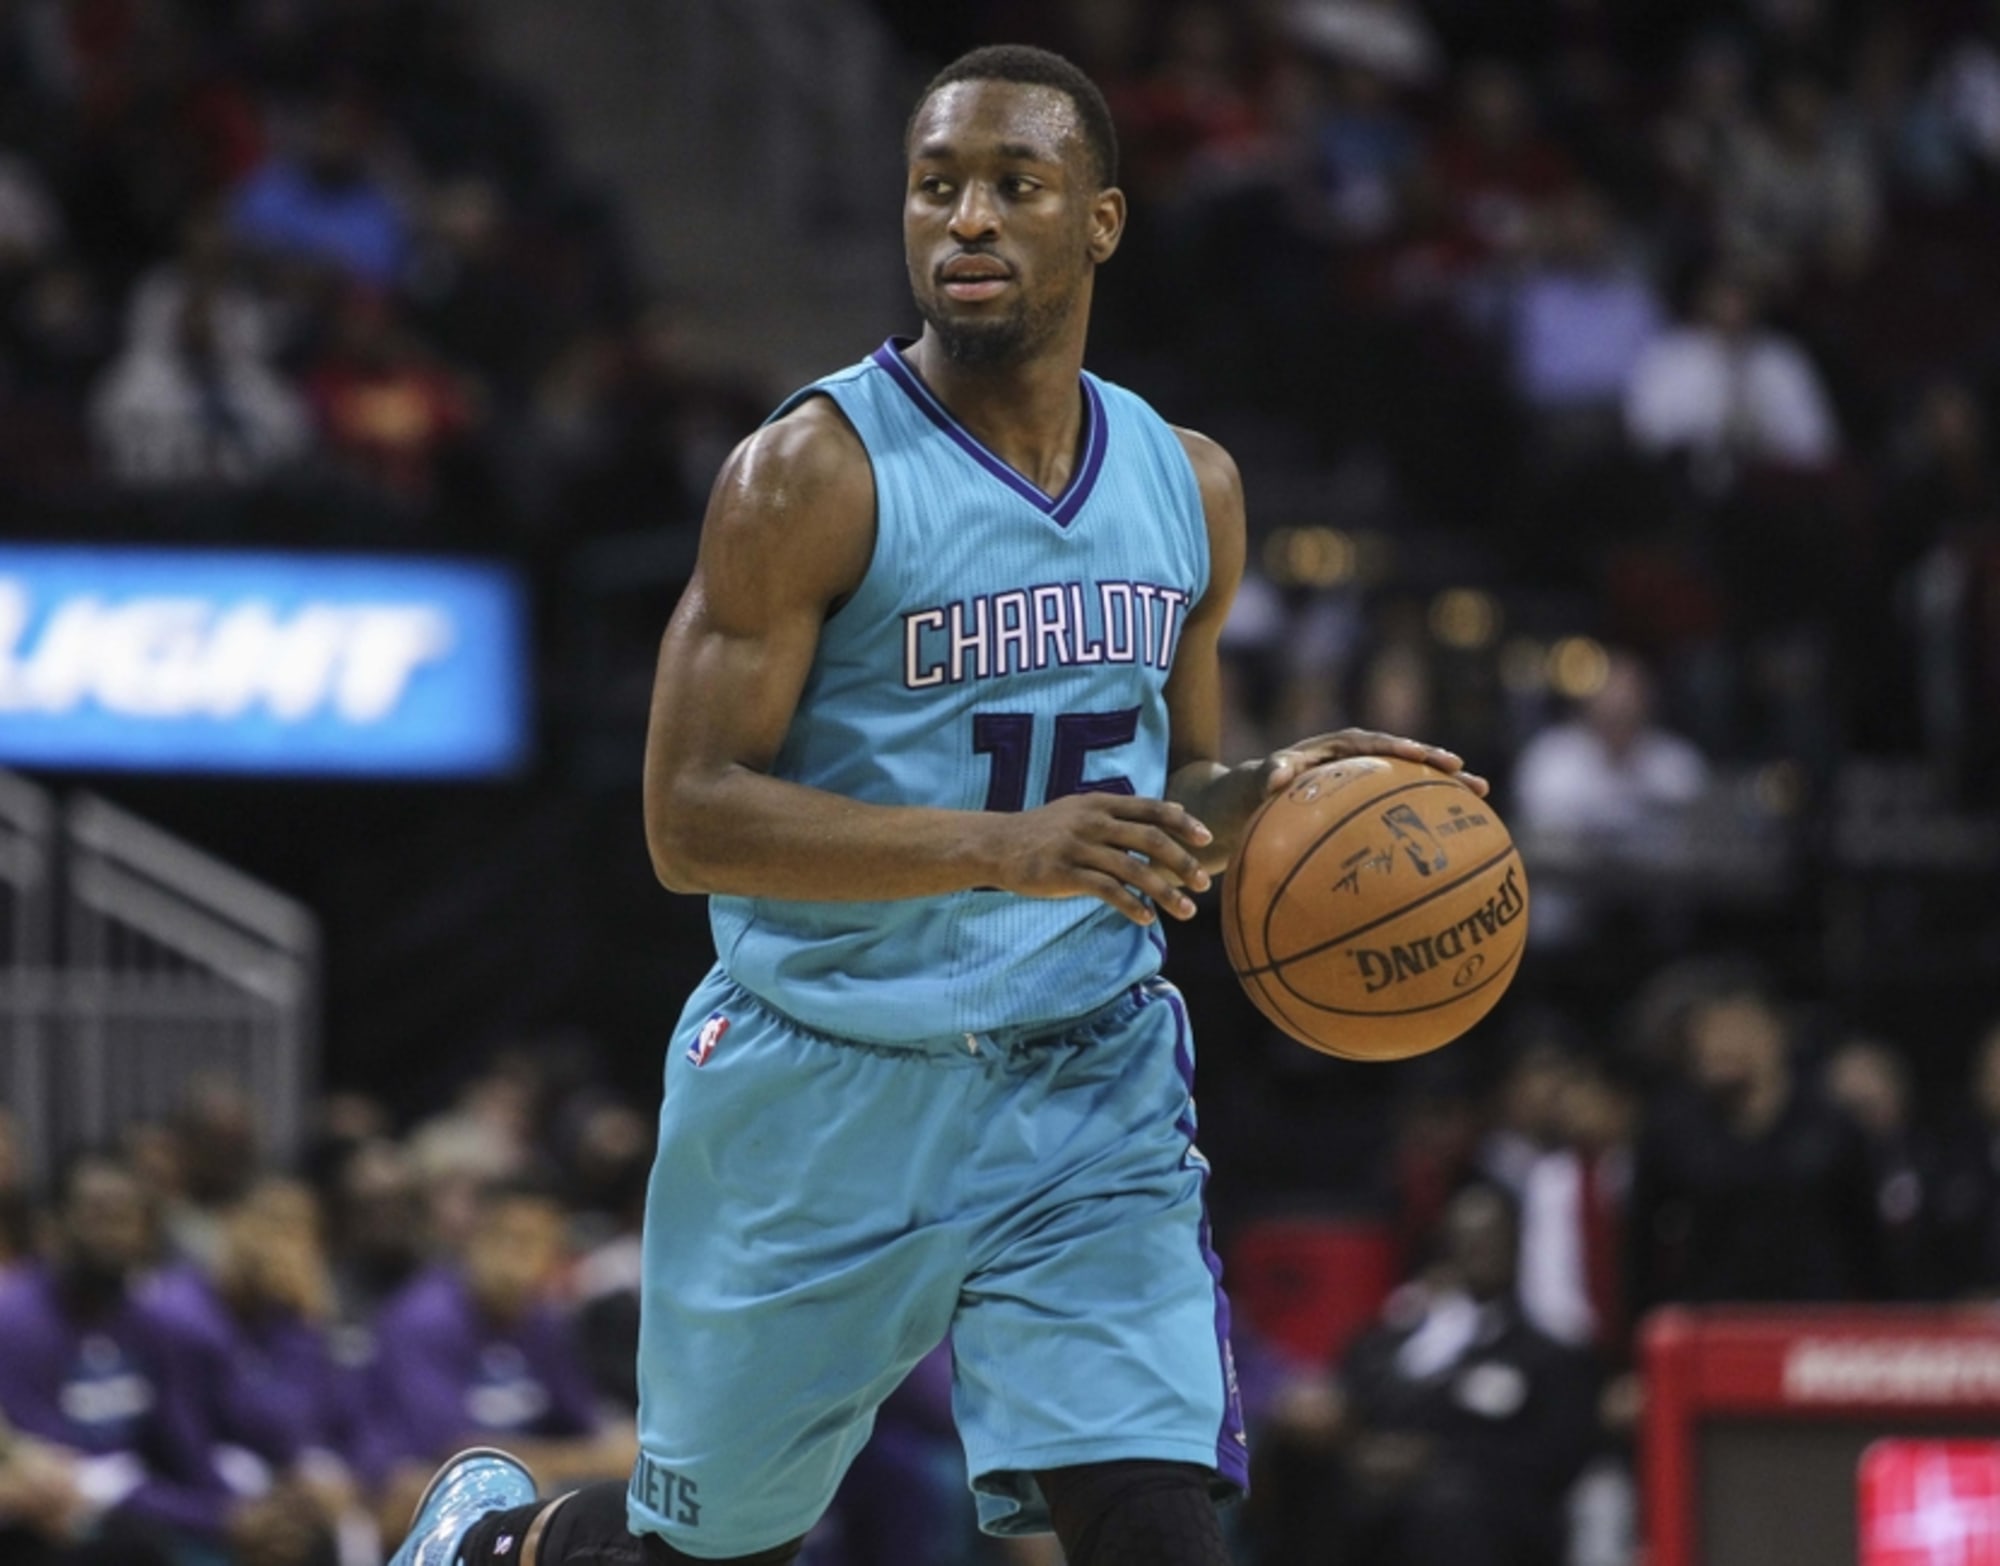 My day with Charlotte Hornets' point guard Kemba Walker